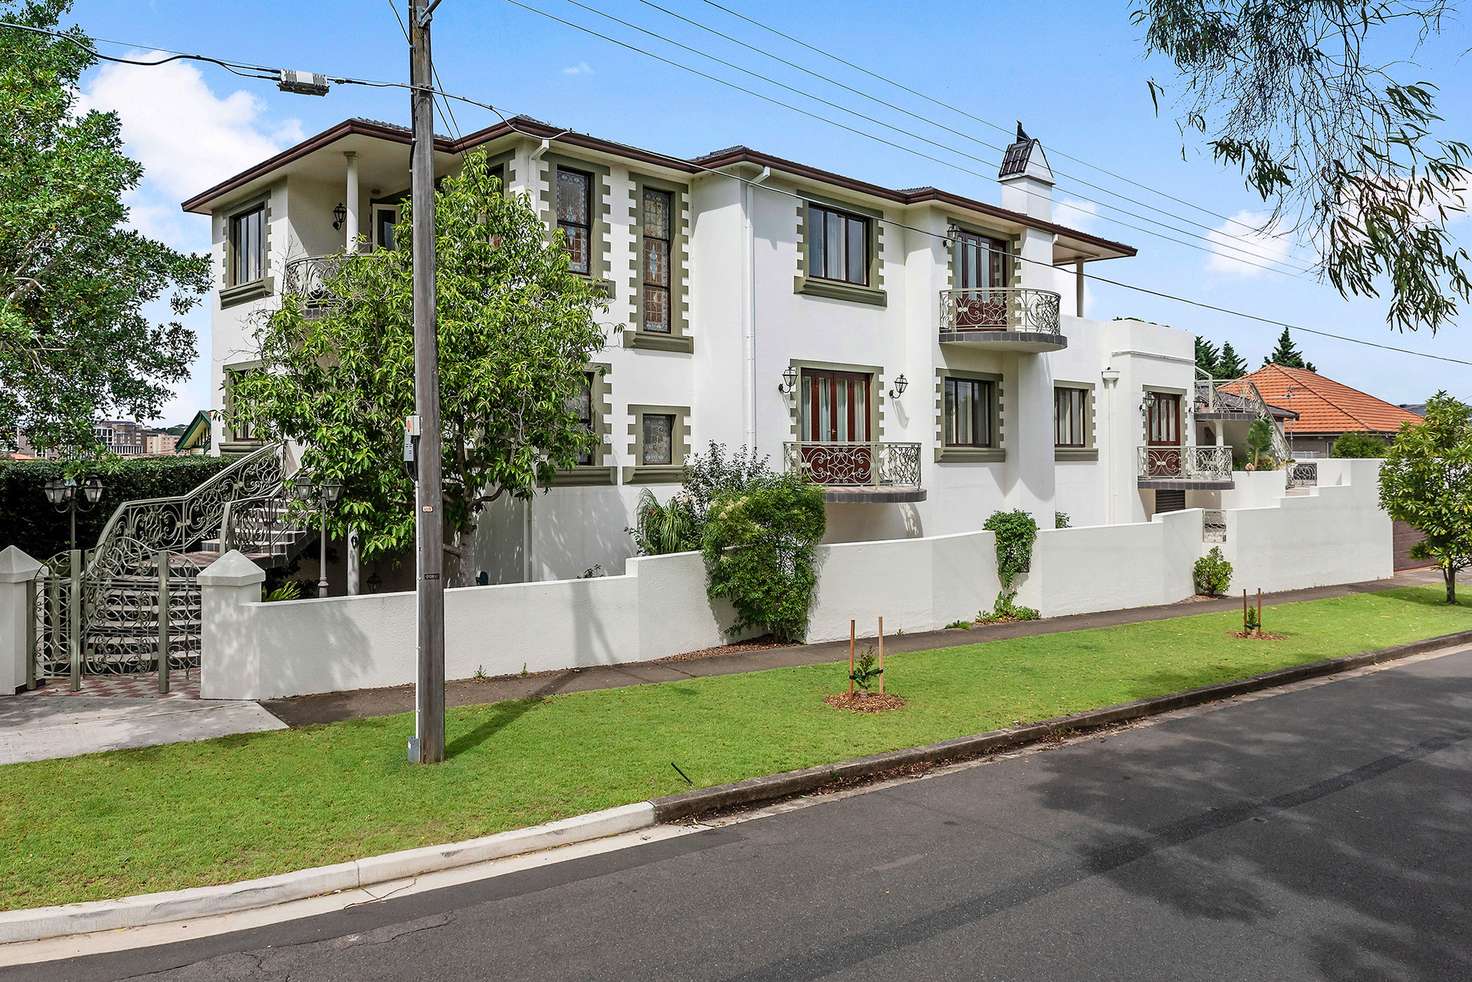 Main view of Homely house listing, 1 Tedwin Ave, Kensington NSW 2033